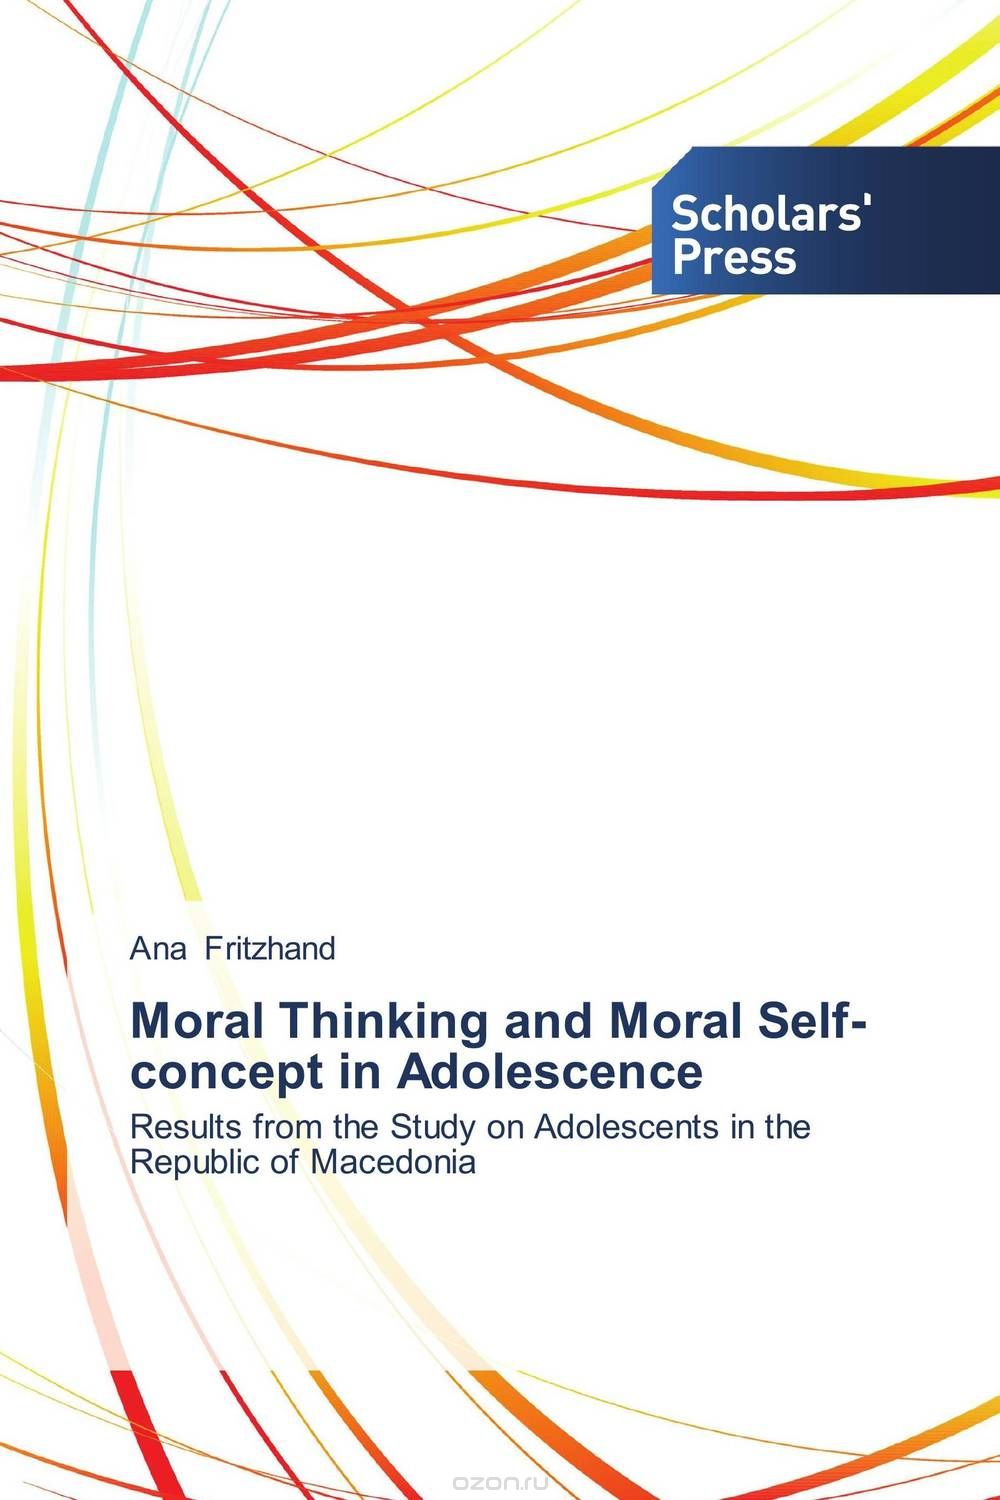 Скачать книгу "Moral Thinking and Moral Self-concept in Adolescence"